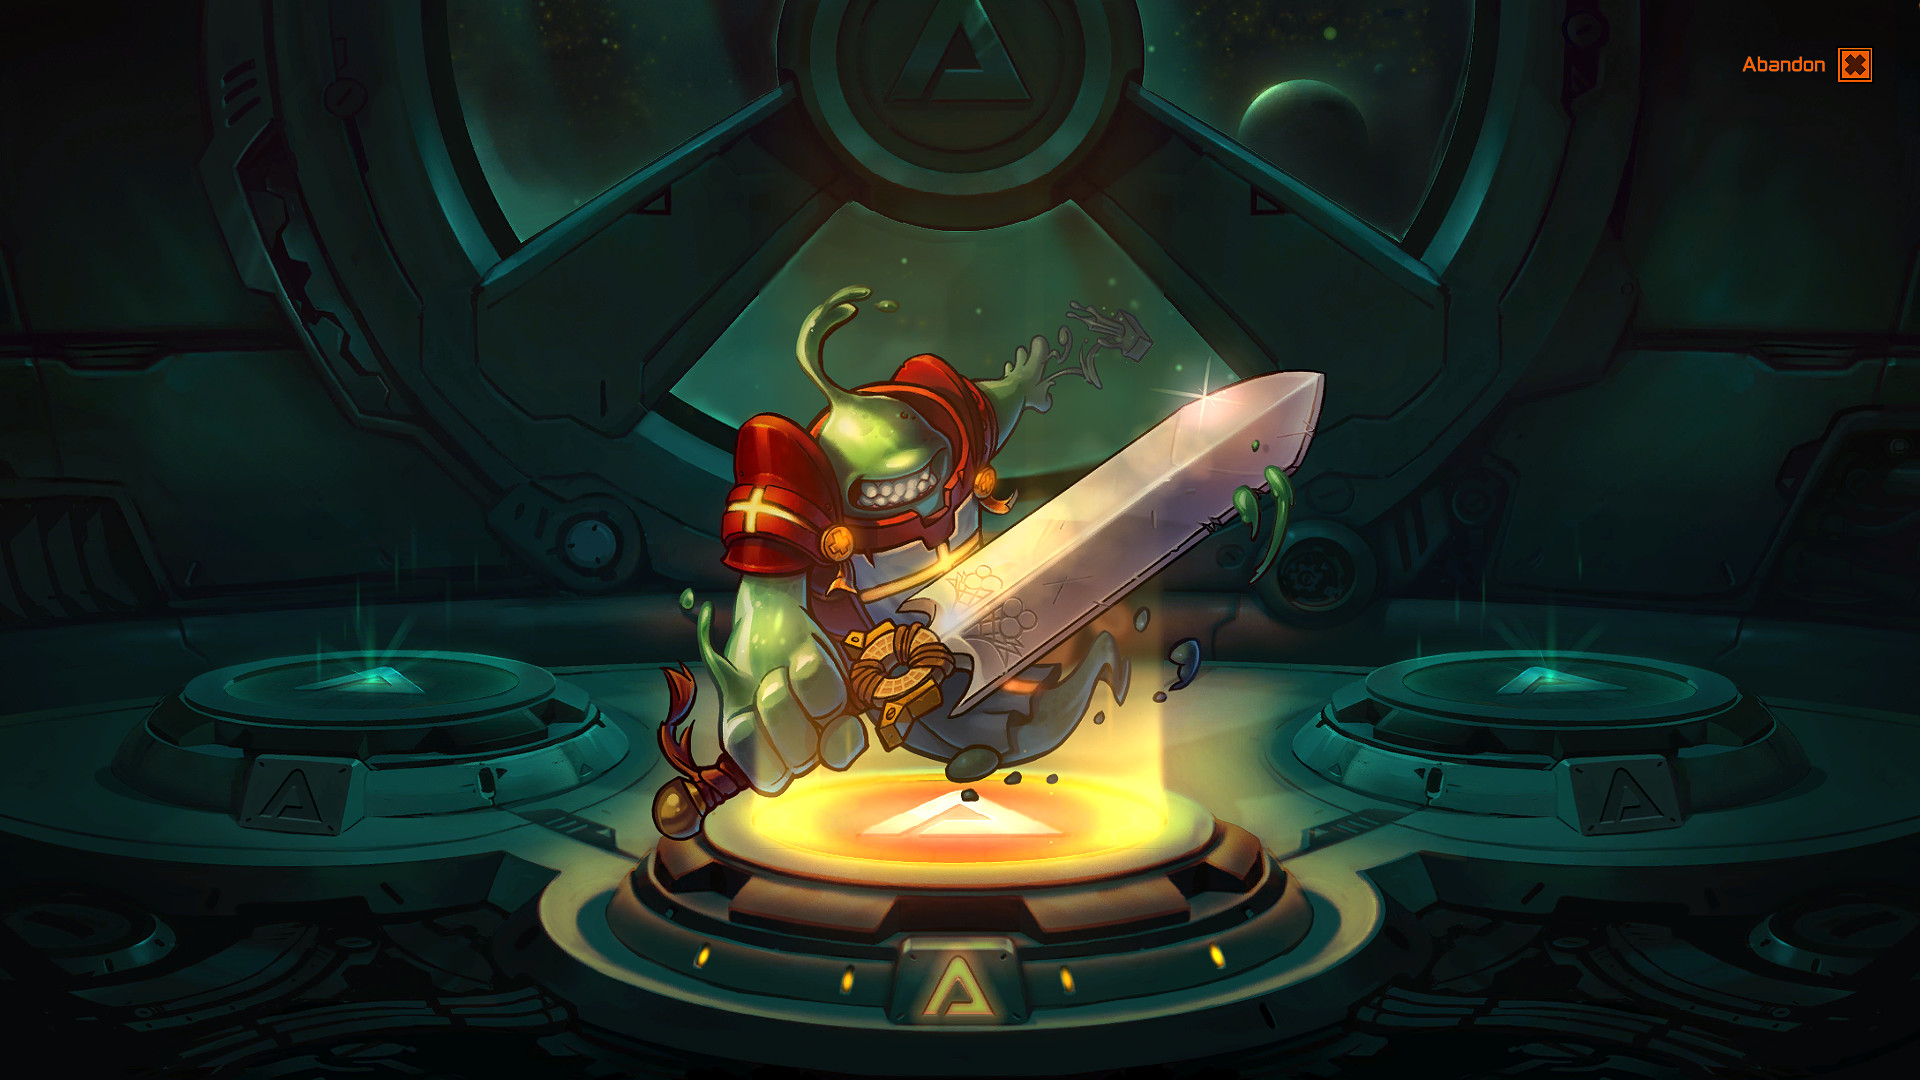 Scoop of Justice - Awesomenauts Character screenshot